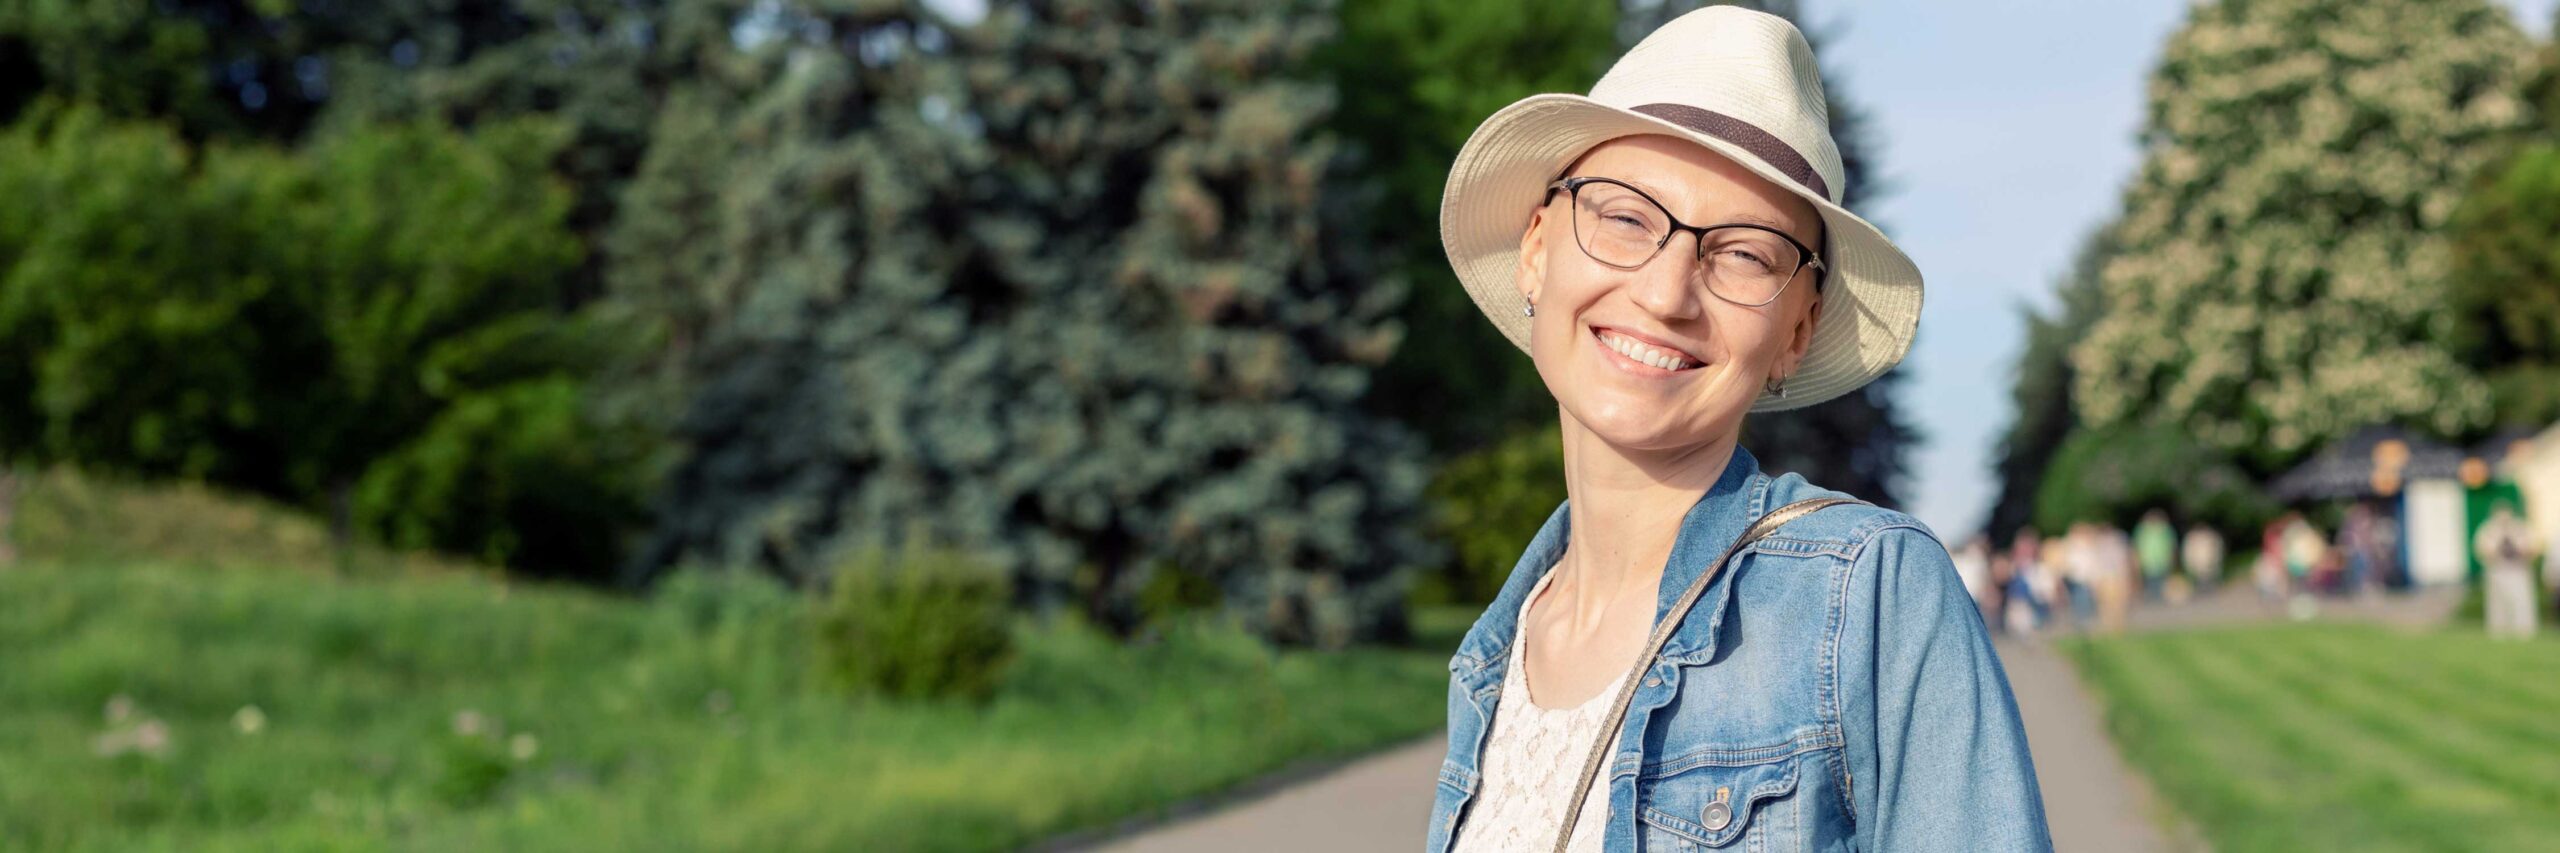 Woman with cancer looking forward to the future after preserving her fertility with oncofertility at Ember Fertility Center | Laguna Hills & Orange County, CA